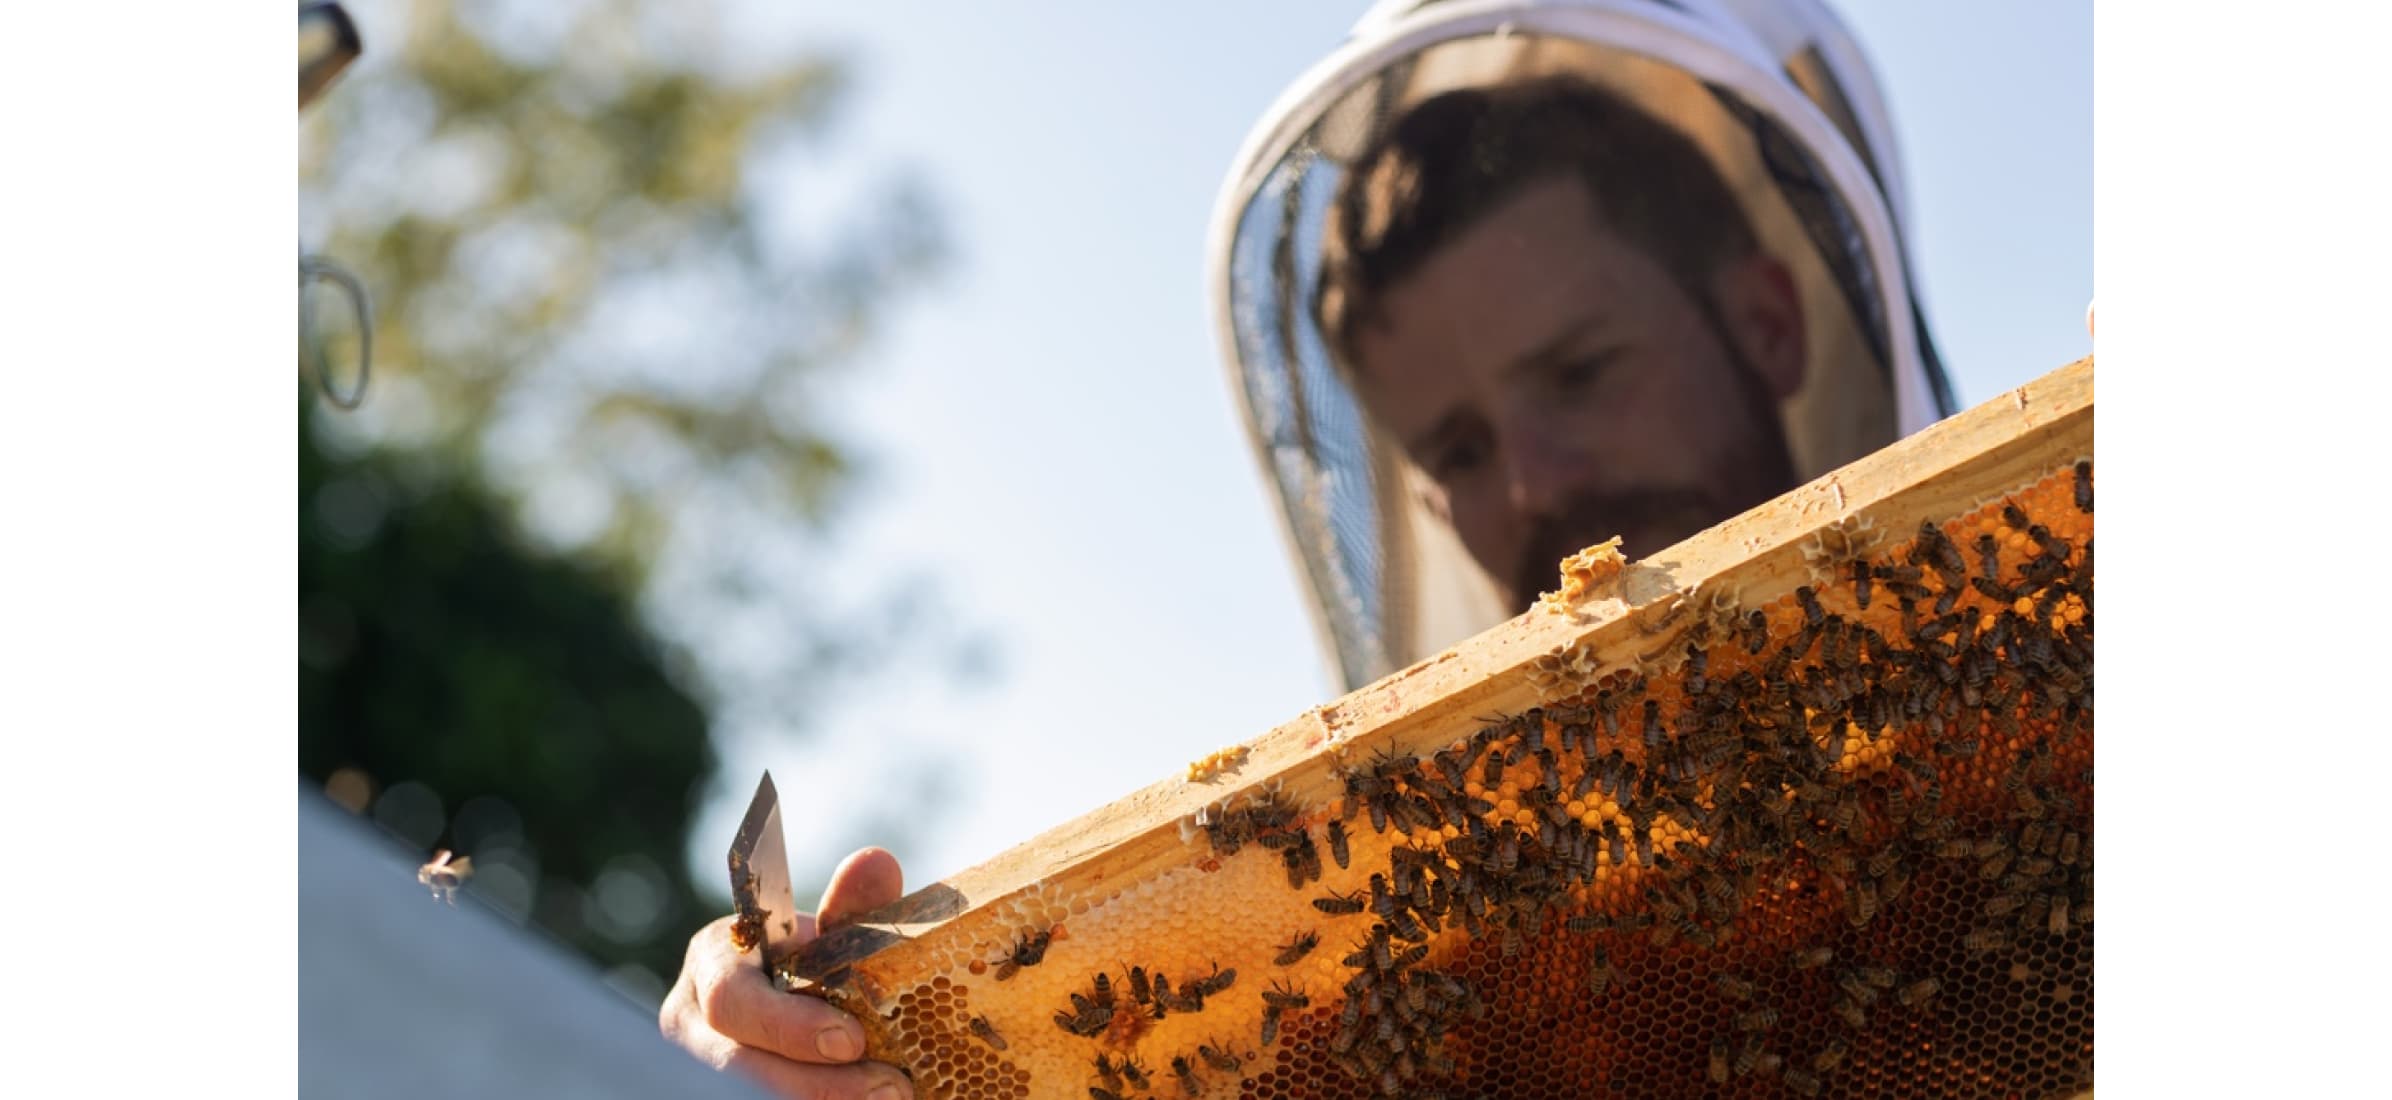 Rory O’Brien holding a beehive frame filled with bees.